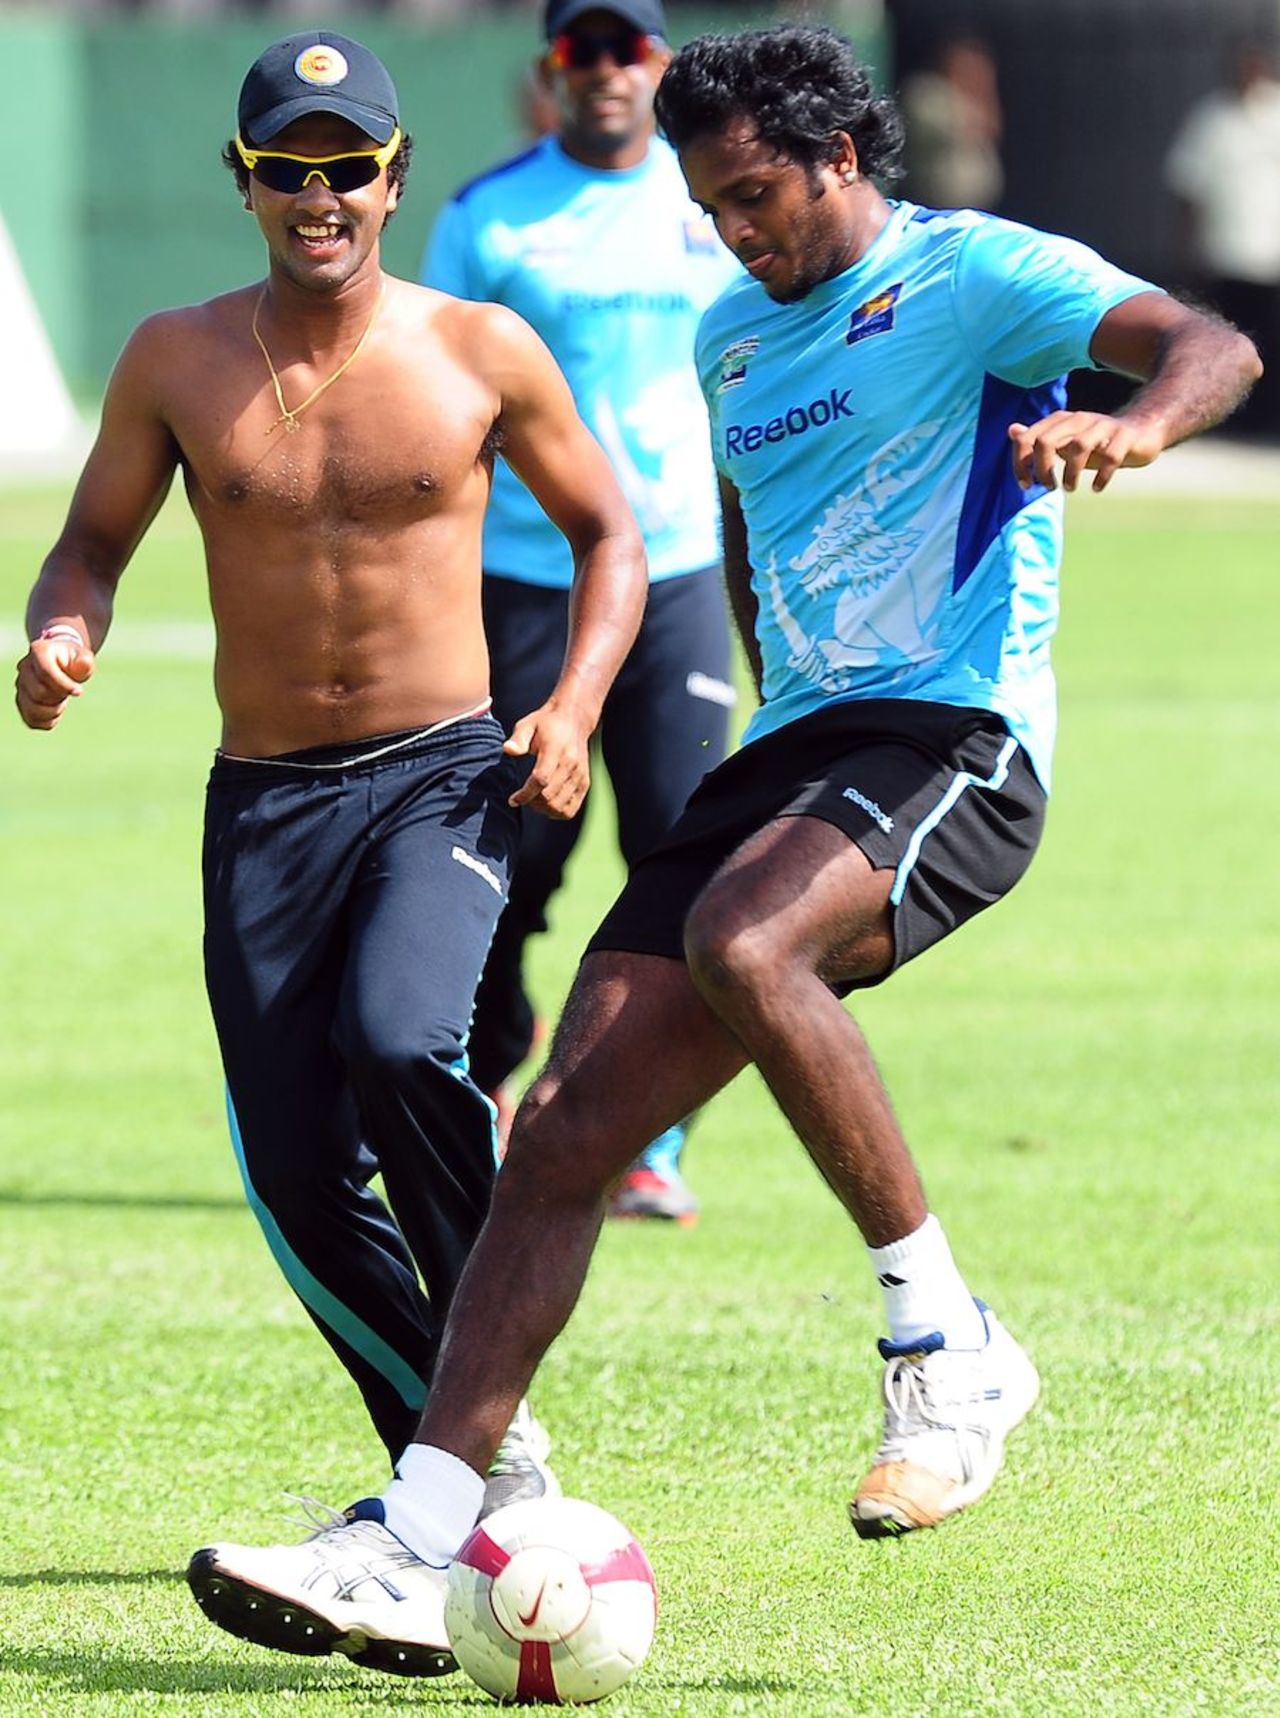 Dinesh Chandimal and Dilhara Fernando play football, SSC, Colombo, June 29, 2012